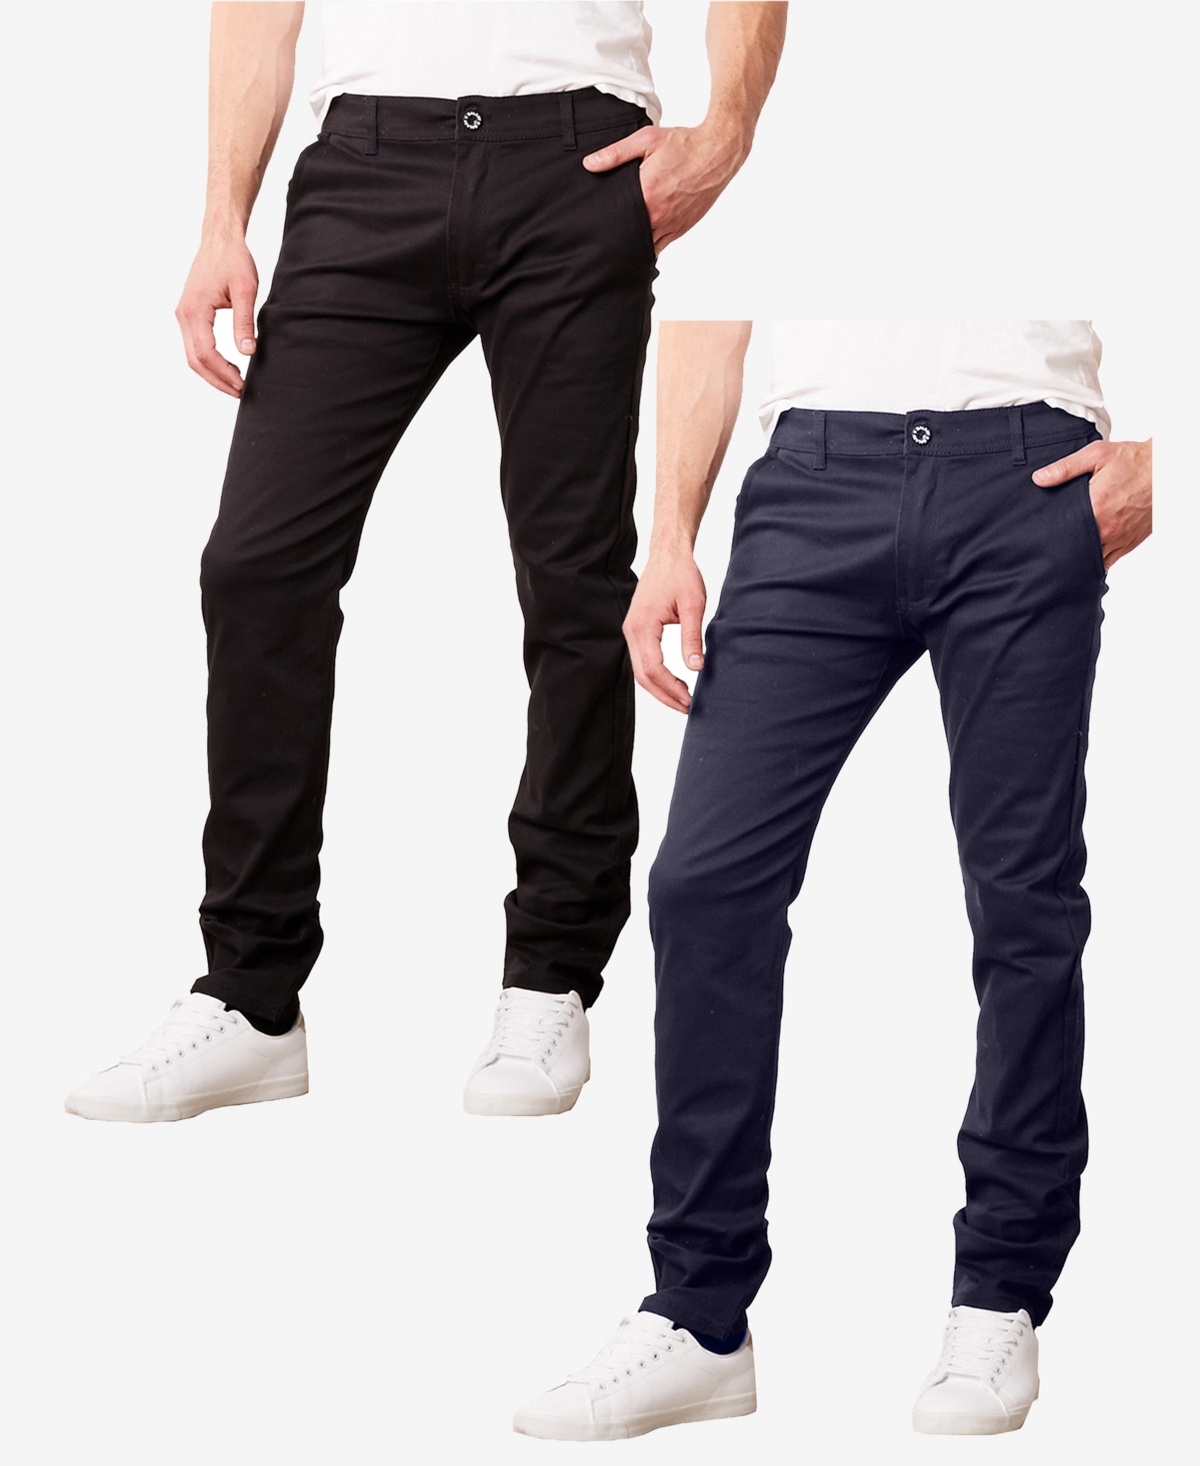 Galaxy By Harvic Men's Super Stretch Slim Fit Everyday Chino Pants, Pack Of 2 In Black Navy